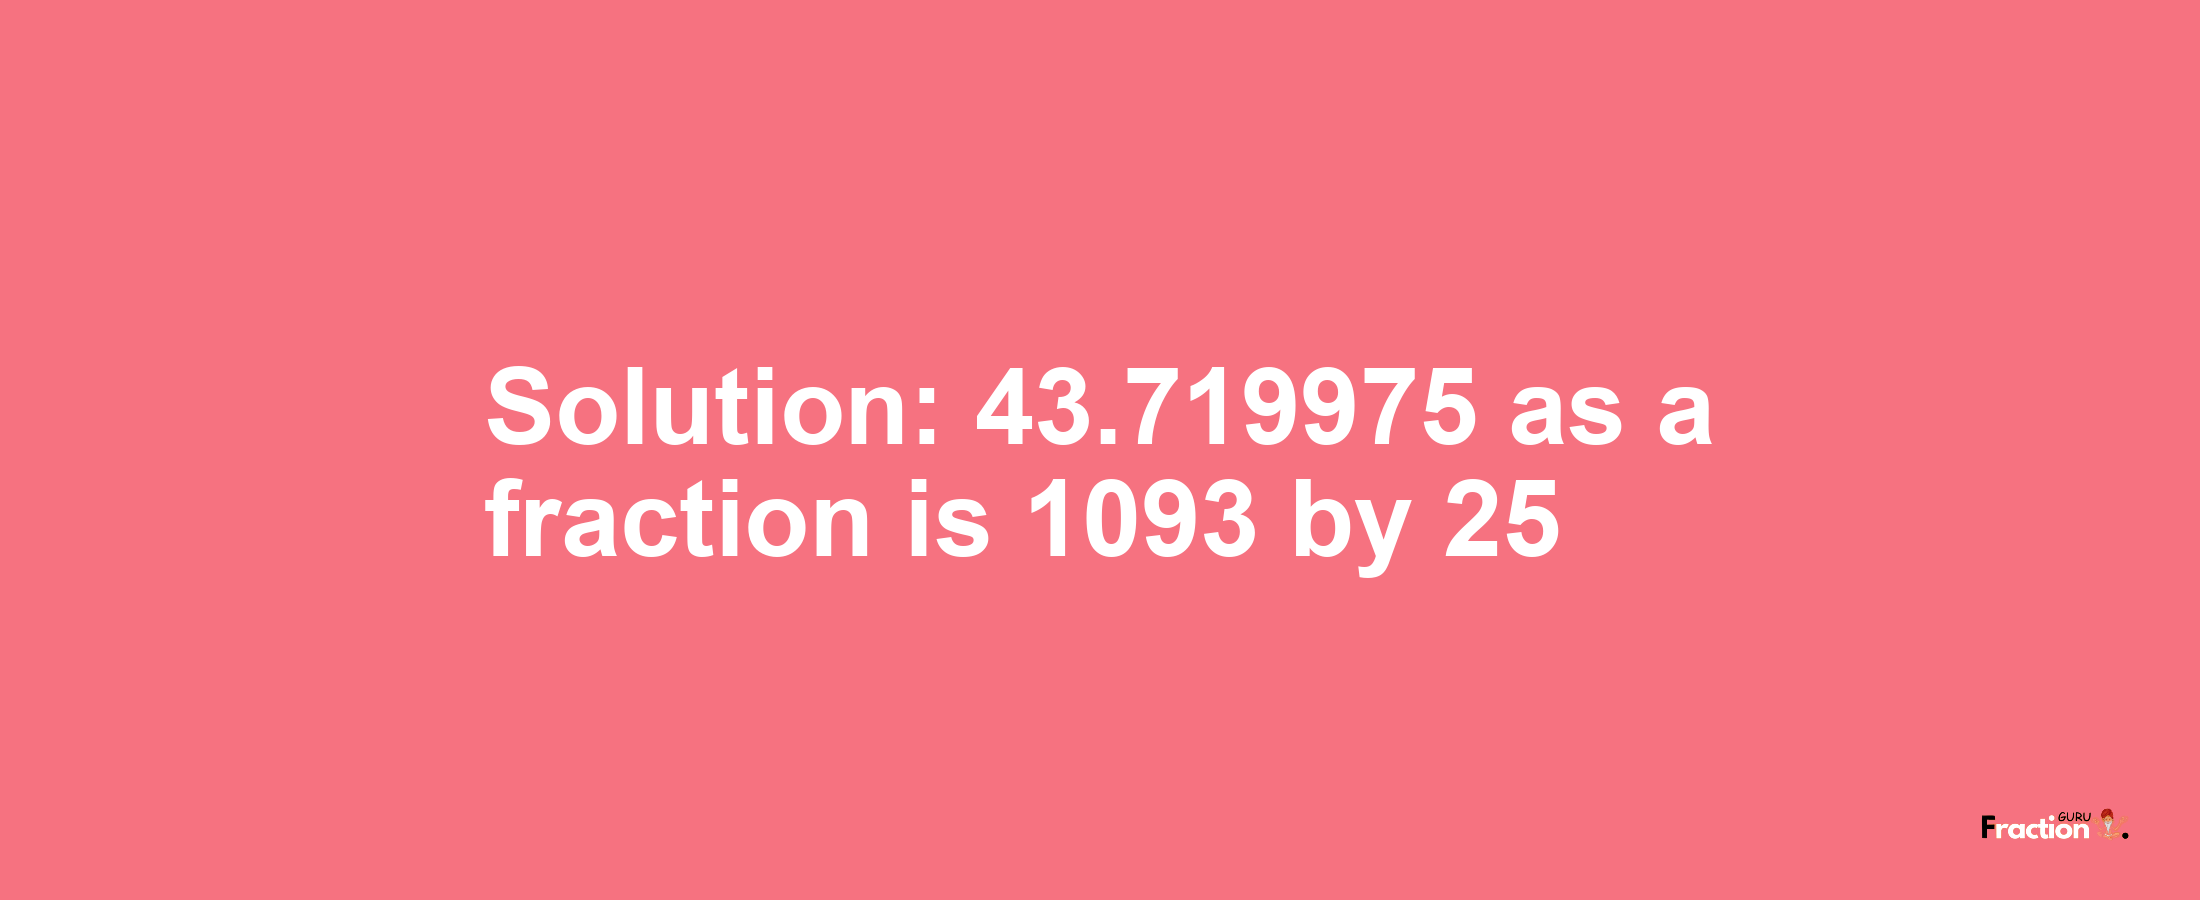 Solution:43.719975 as a fraction is 1093/25